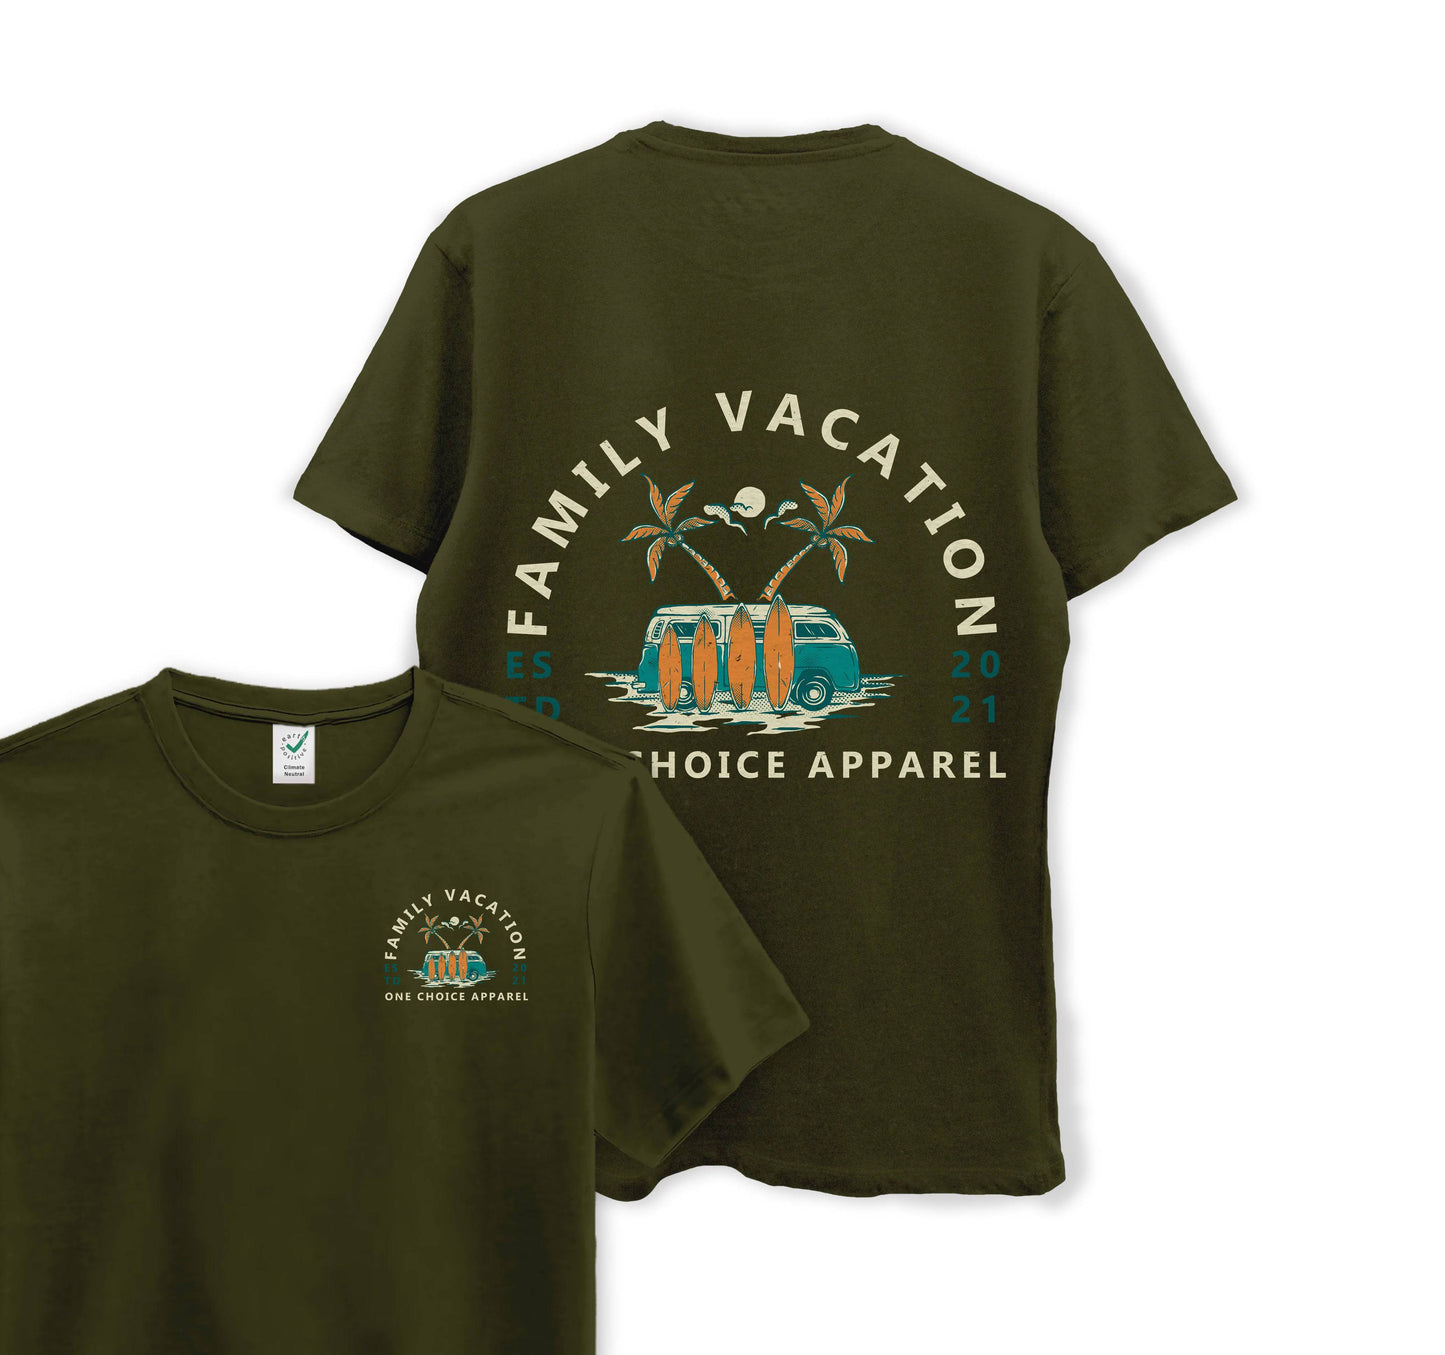 Family Vacation - Organic Cotton Tee - One Choice Apparel